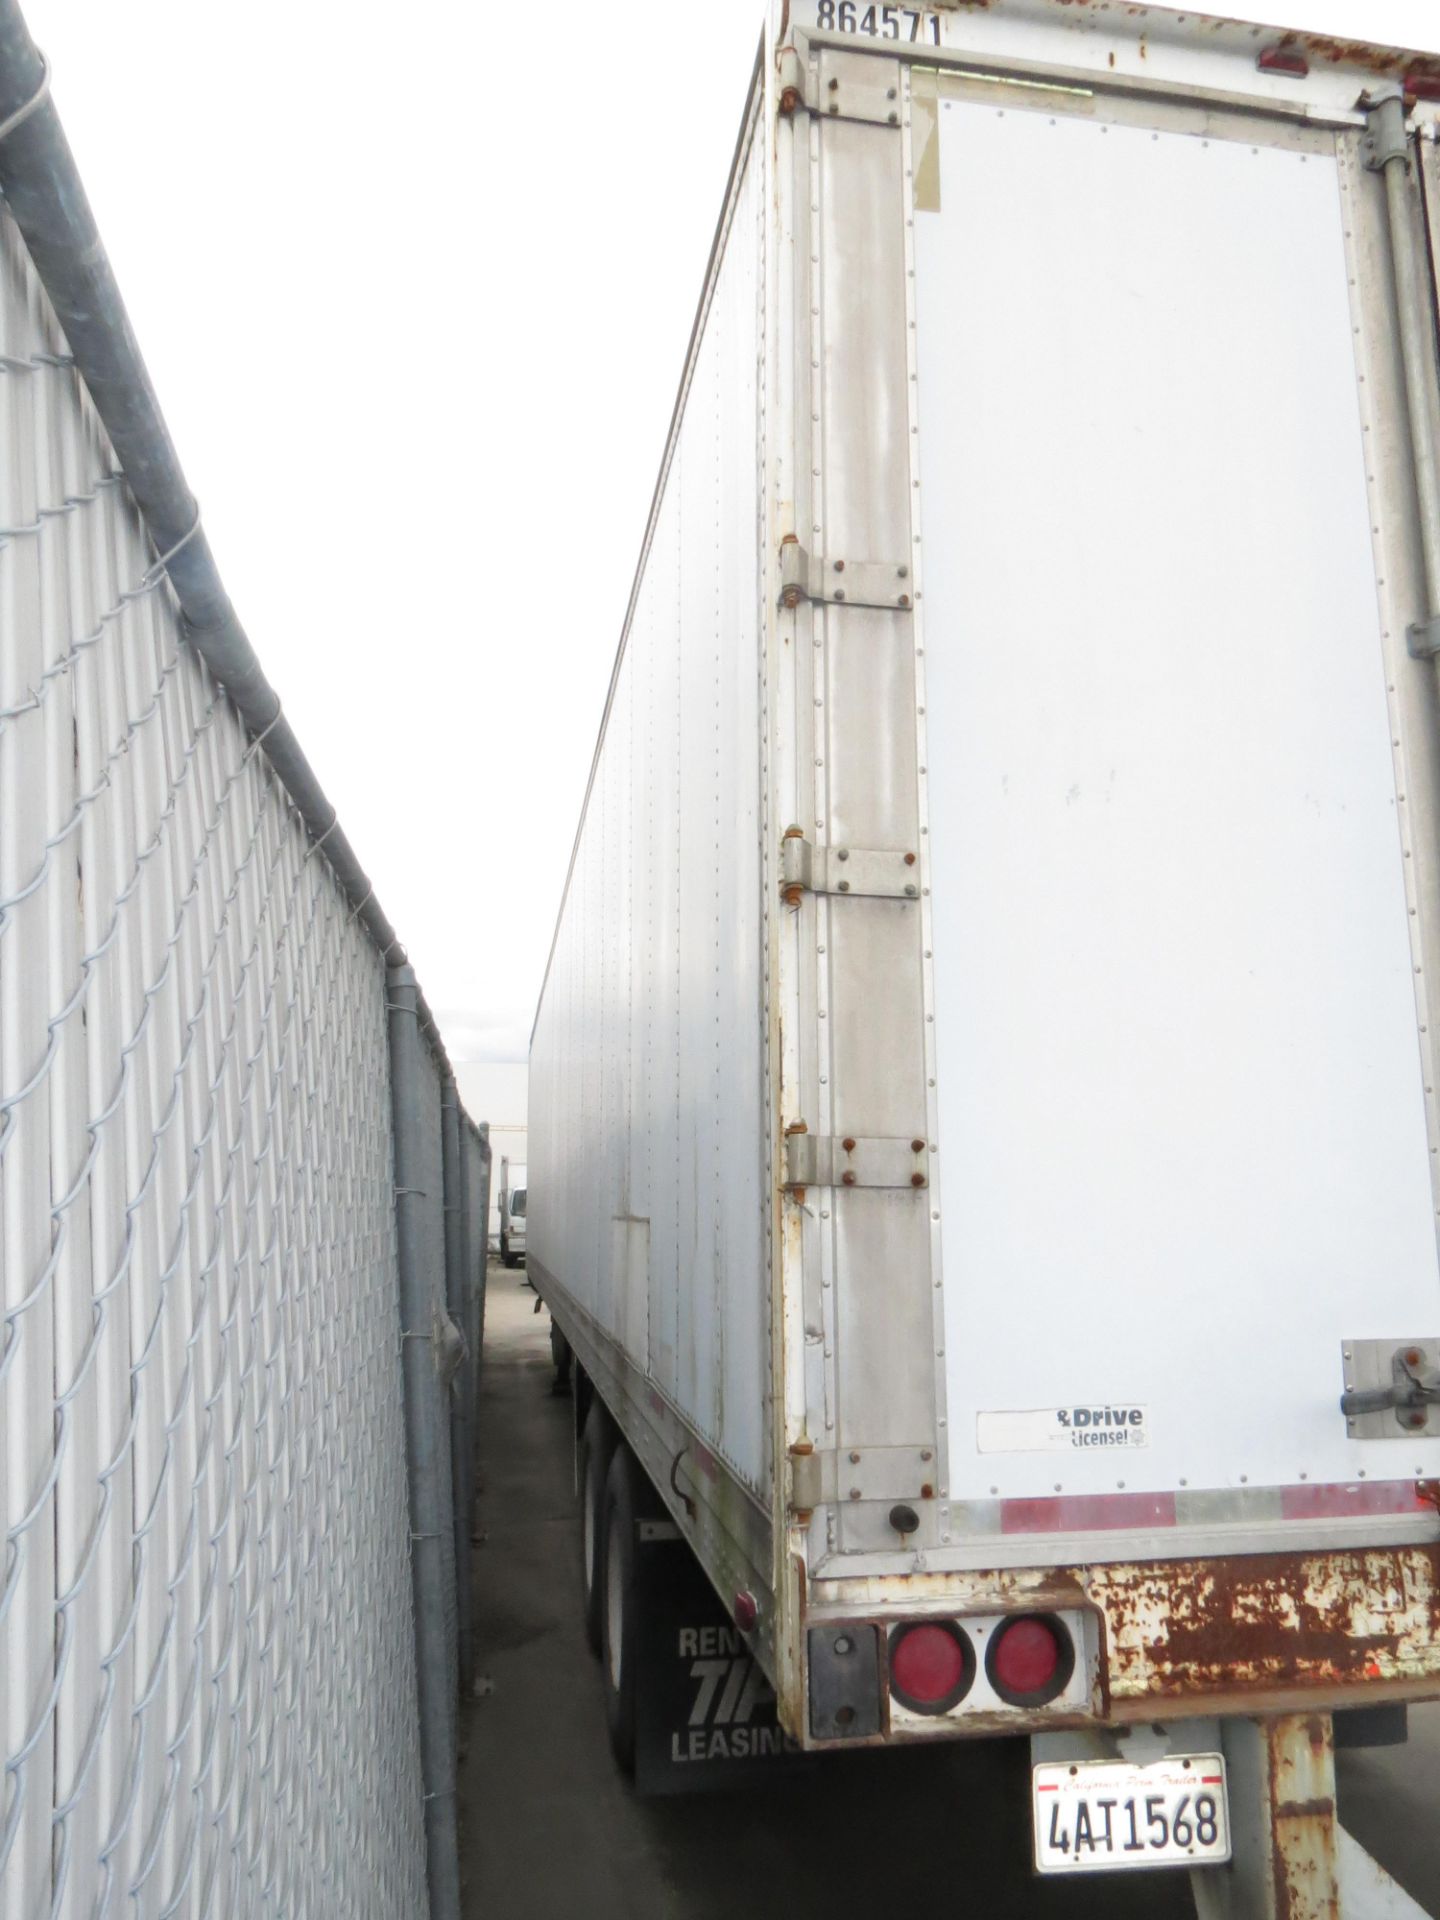 1997 Trailmobile 53' Thermo King Smart Reefer #3 Trailer, Model - 01AC-1UAY, VIN: 1PT01ACHXW9001357, - Image 6 of 9